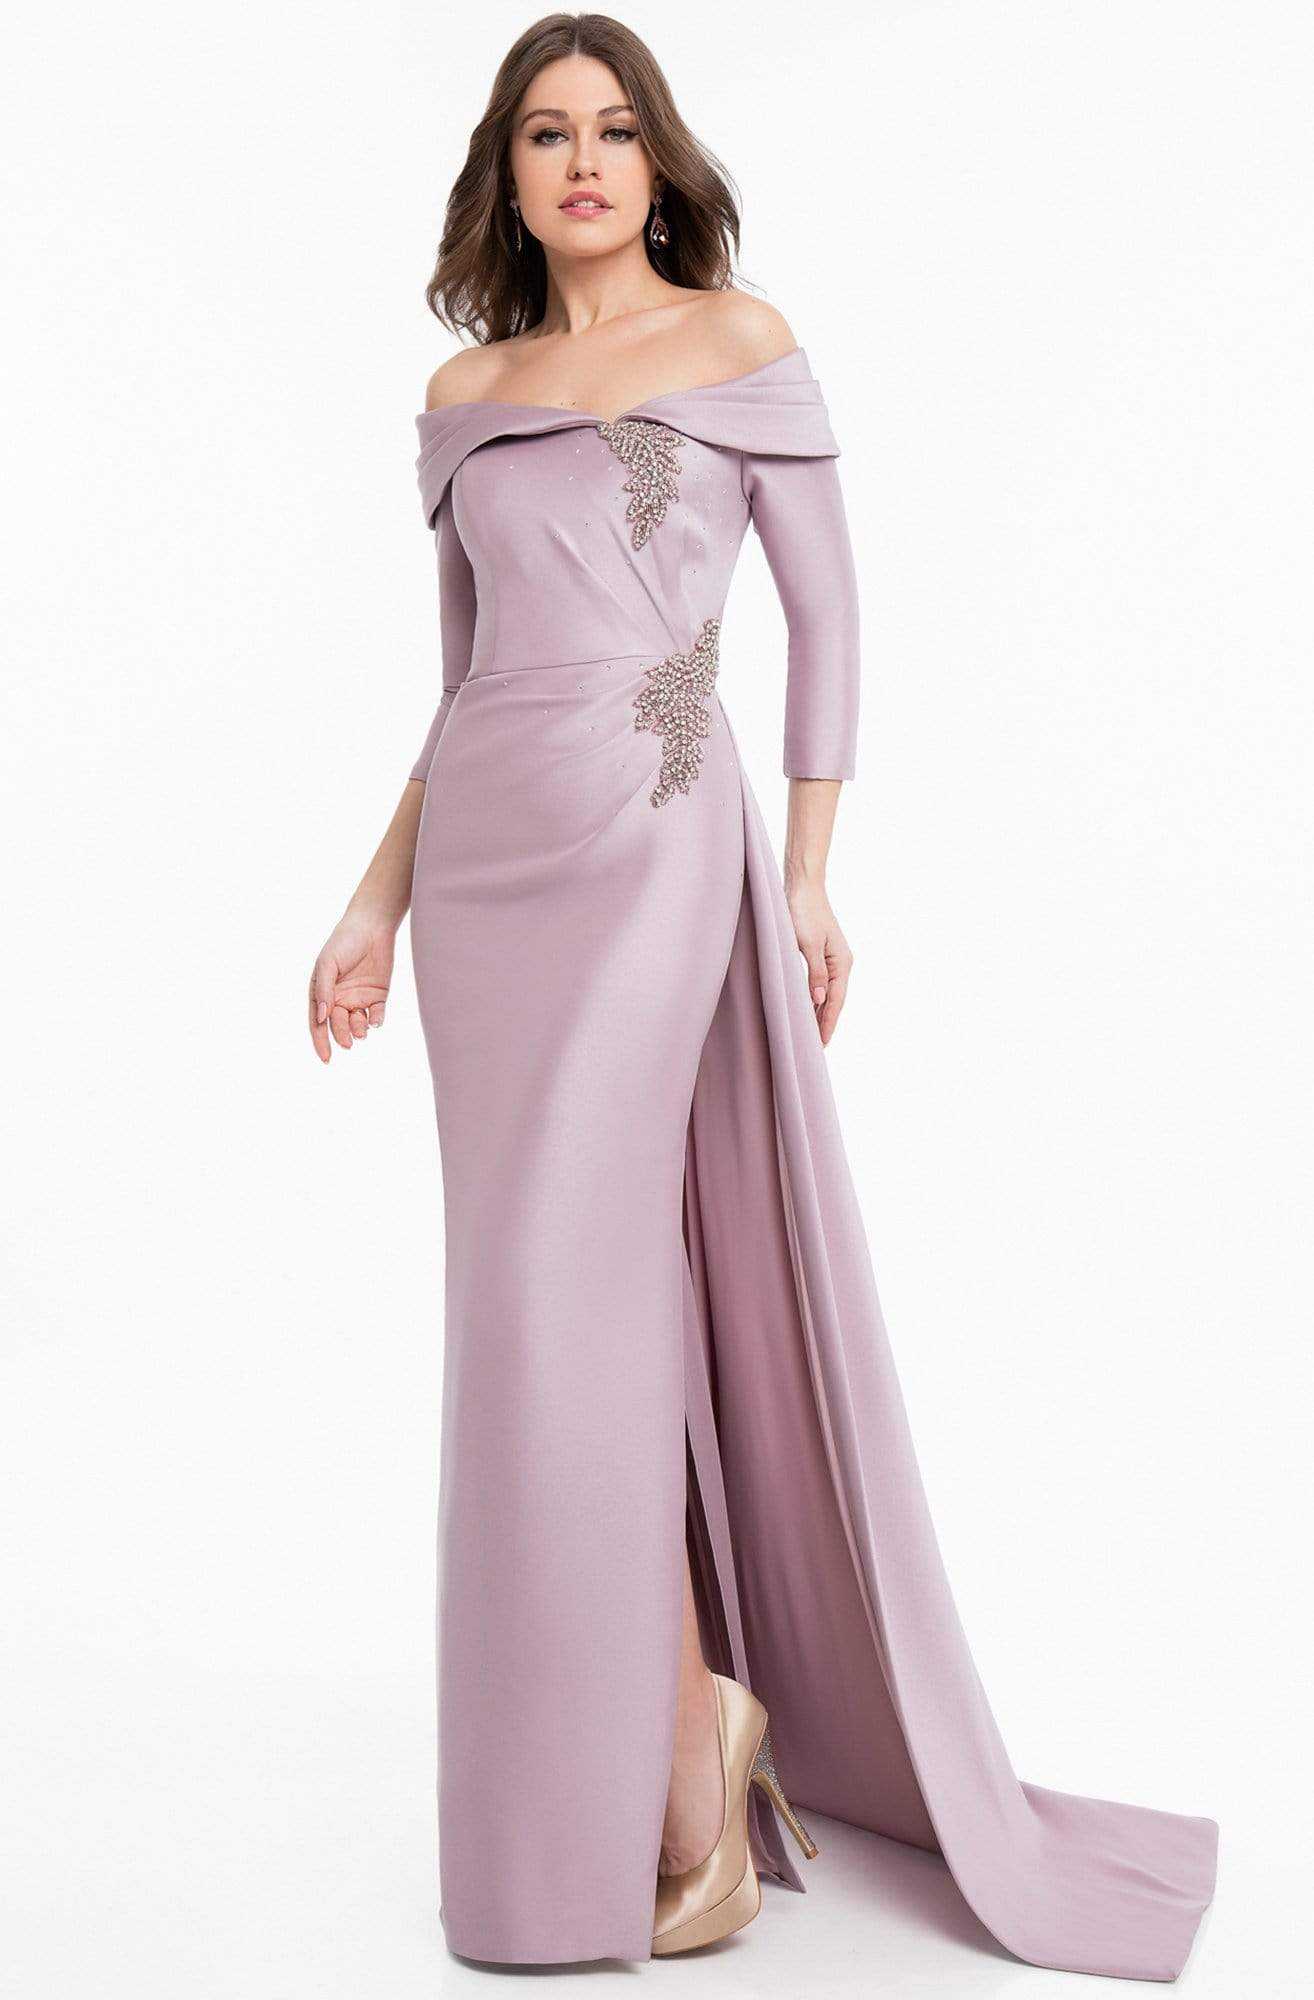 Terani Couture, Terani Couture - 1821M7550 Folded Off Shoulder Quarter Sleeve Gown